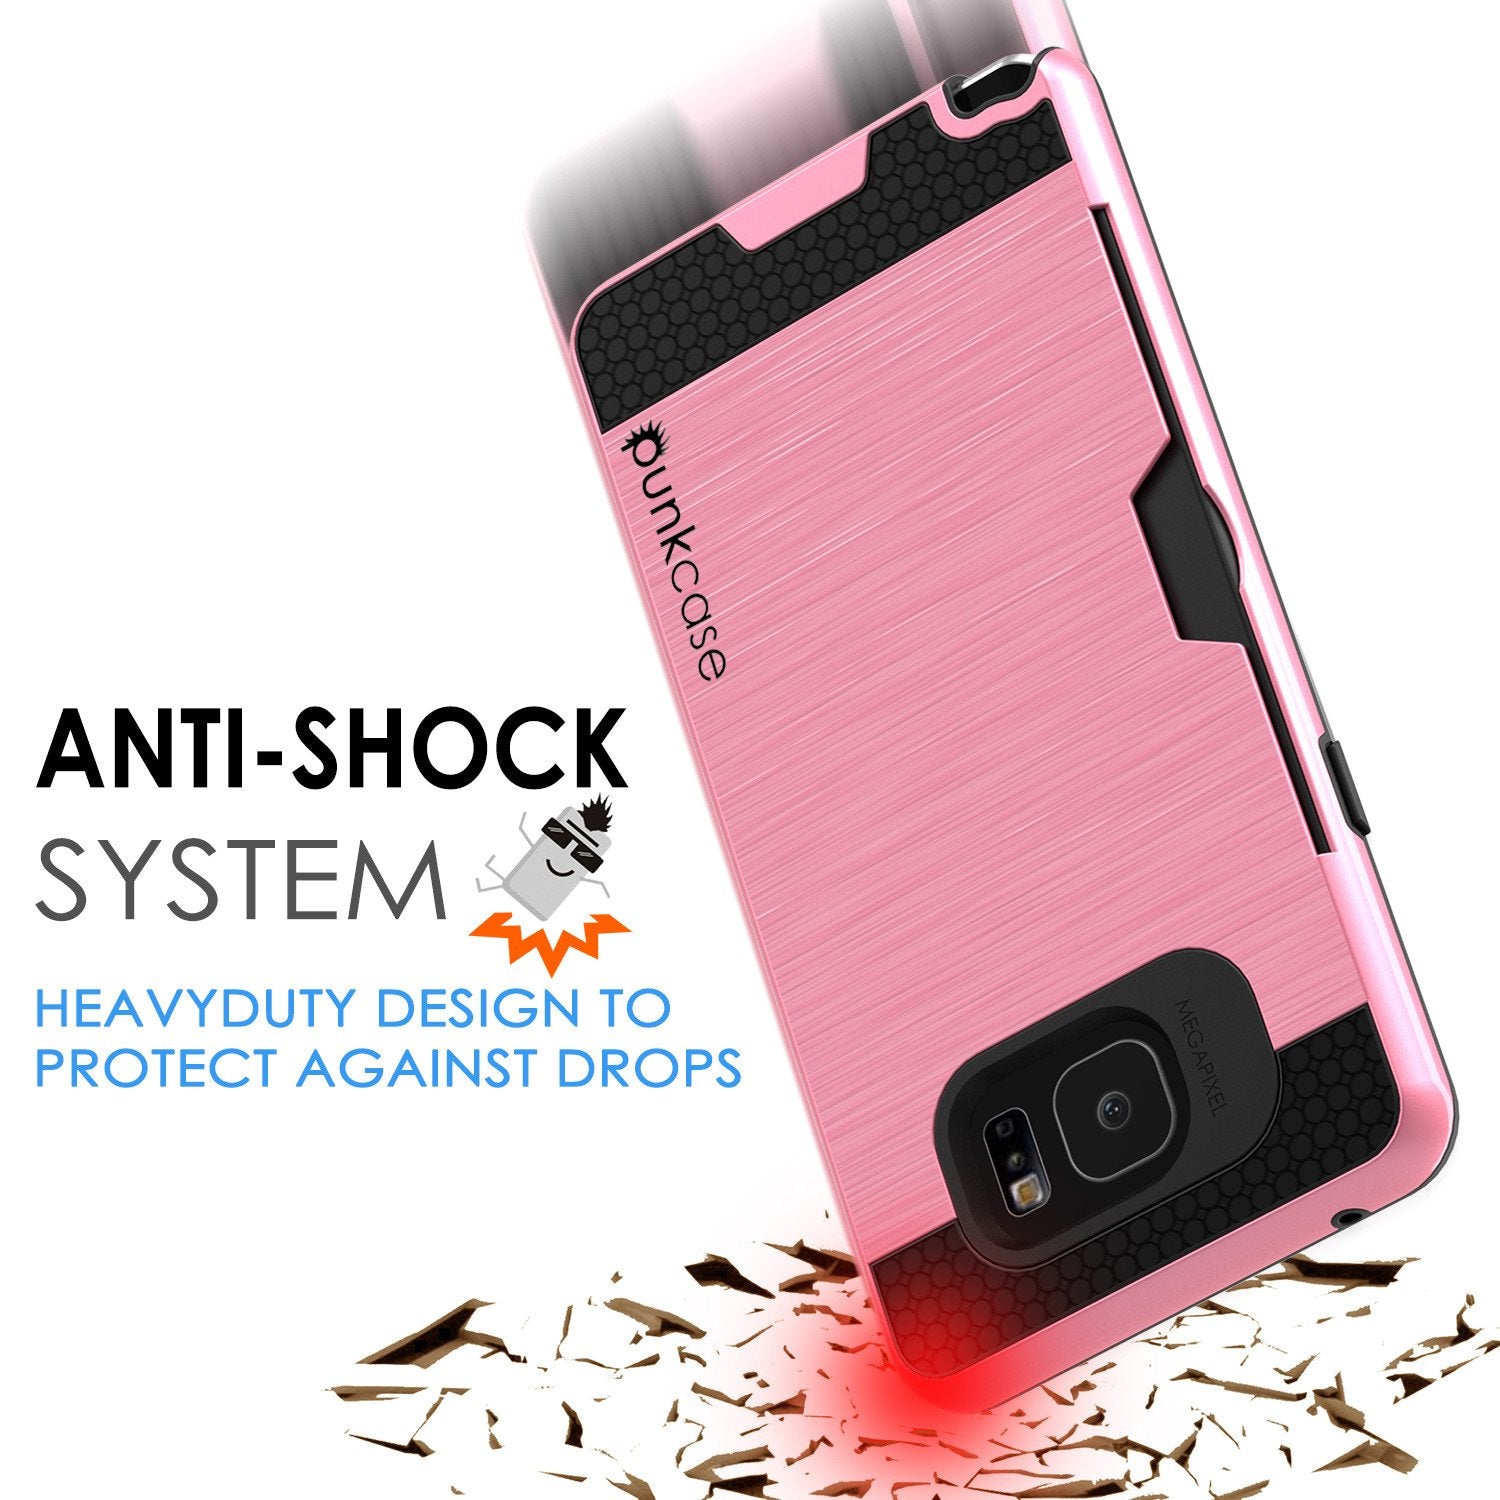 Galaxy Note 5 Case PunkCase SLOT Pink Series Slim Armor Soft Cover Case w/ Tempered Glass - PunkCase NZ